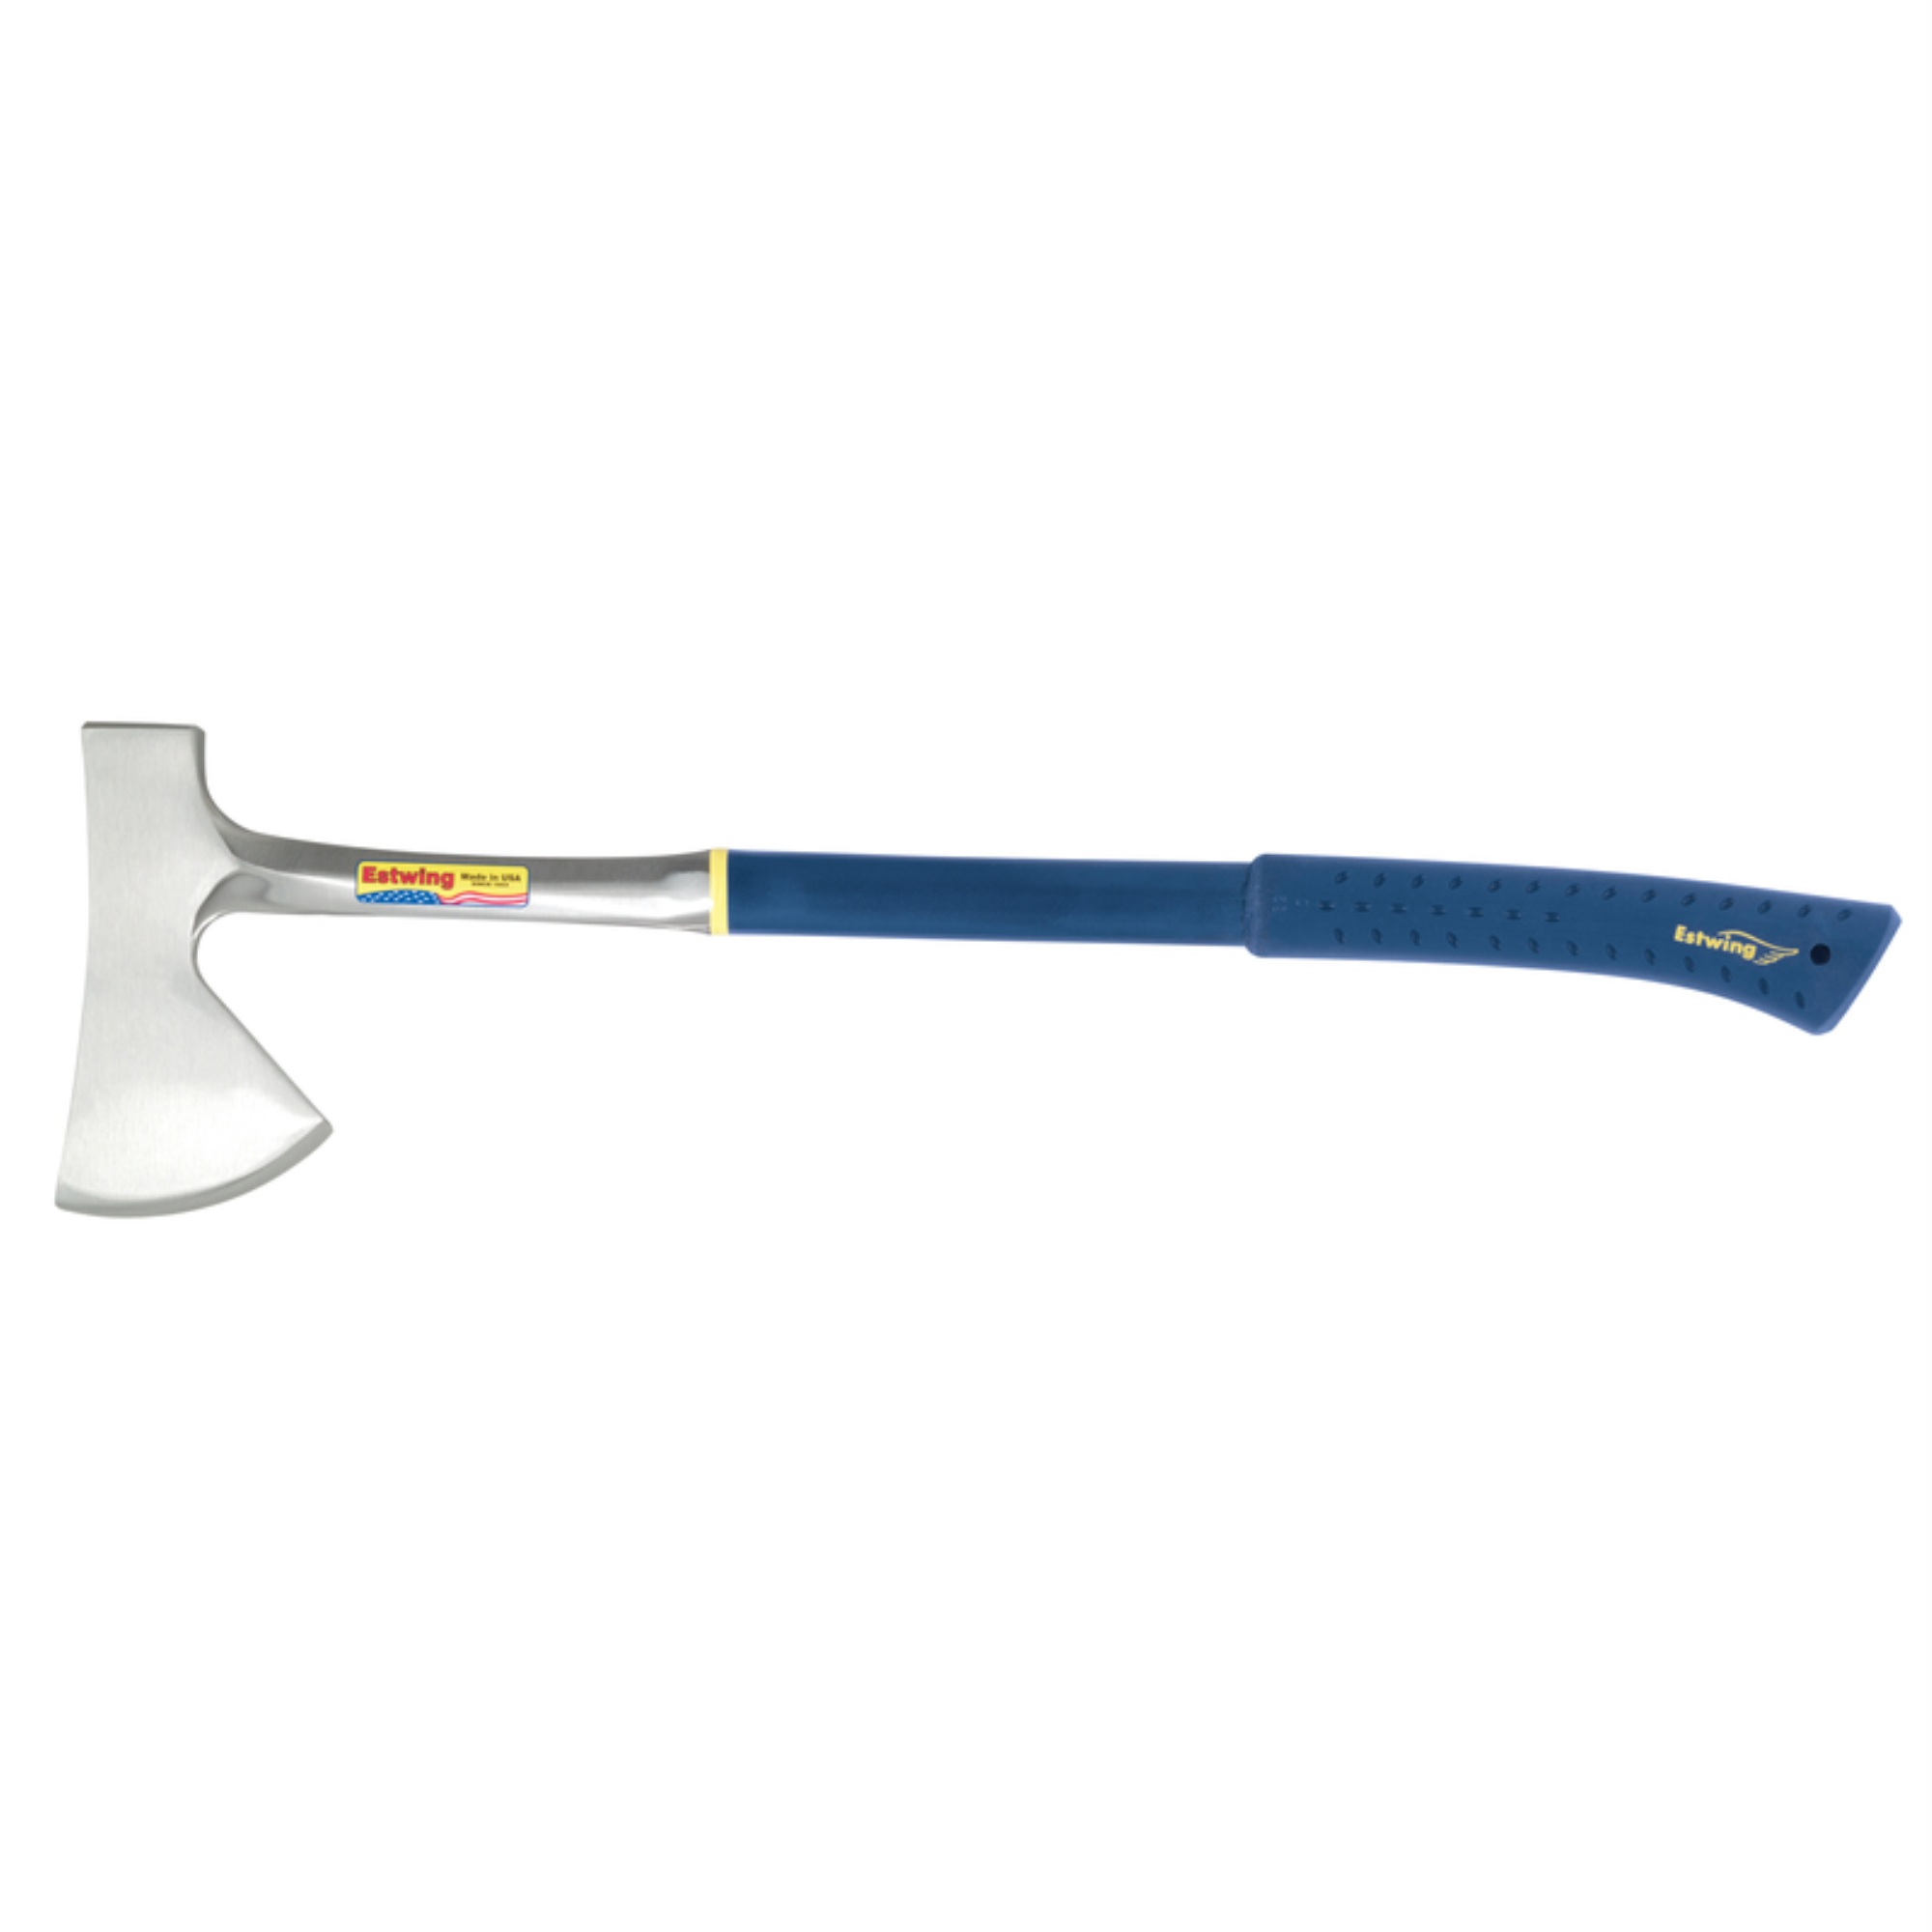 Estwing AXE CAMPERS 26"" (Pack of 1)